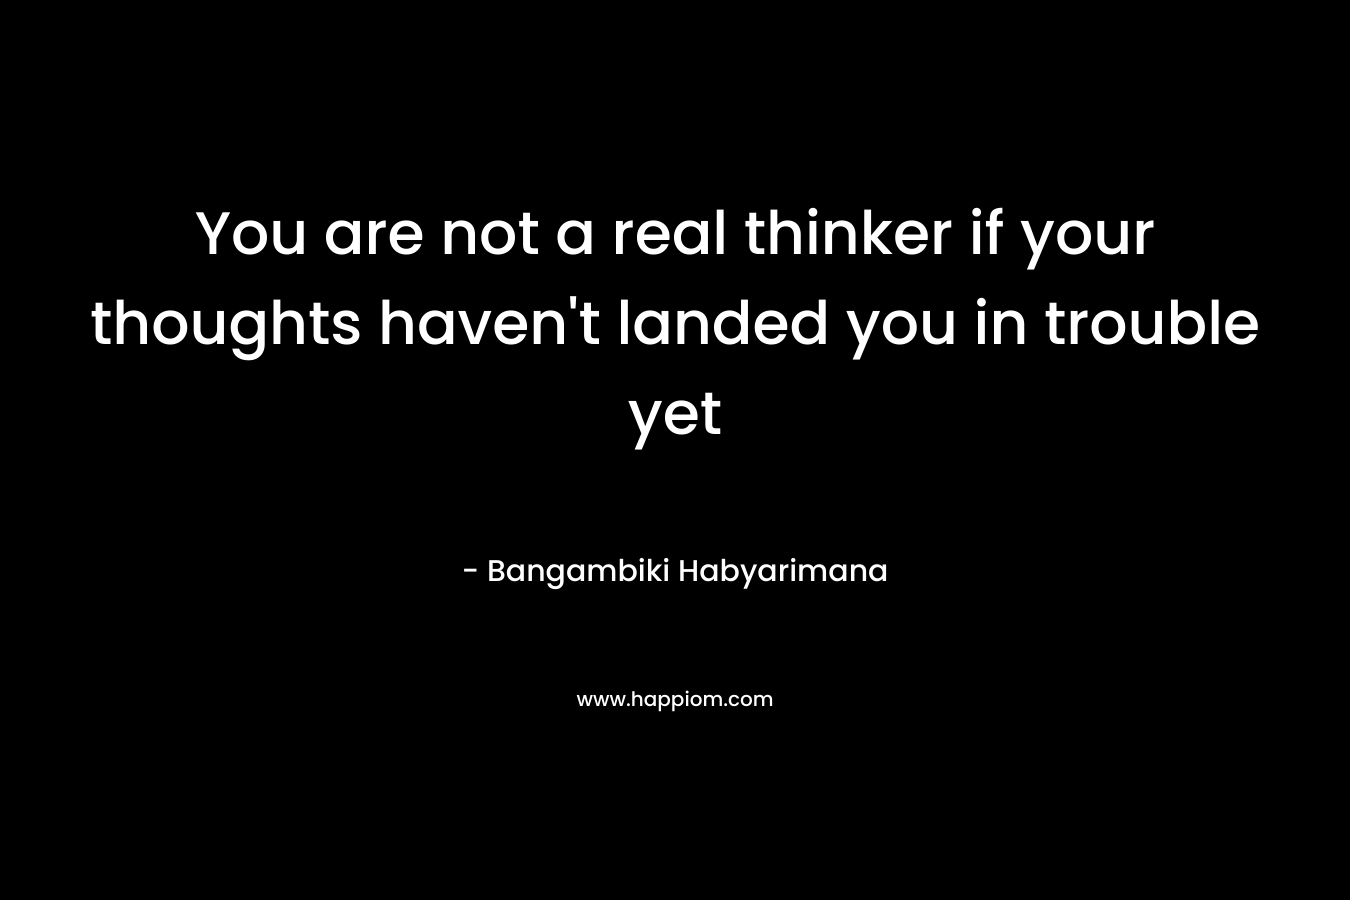 You are not a real thinker if your thoughts haven't landed you in trouble yet